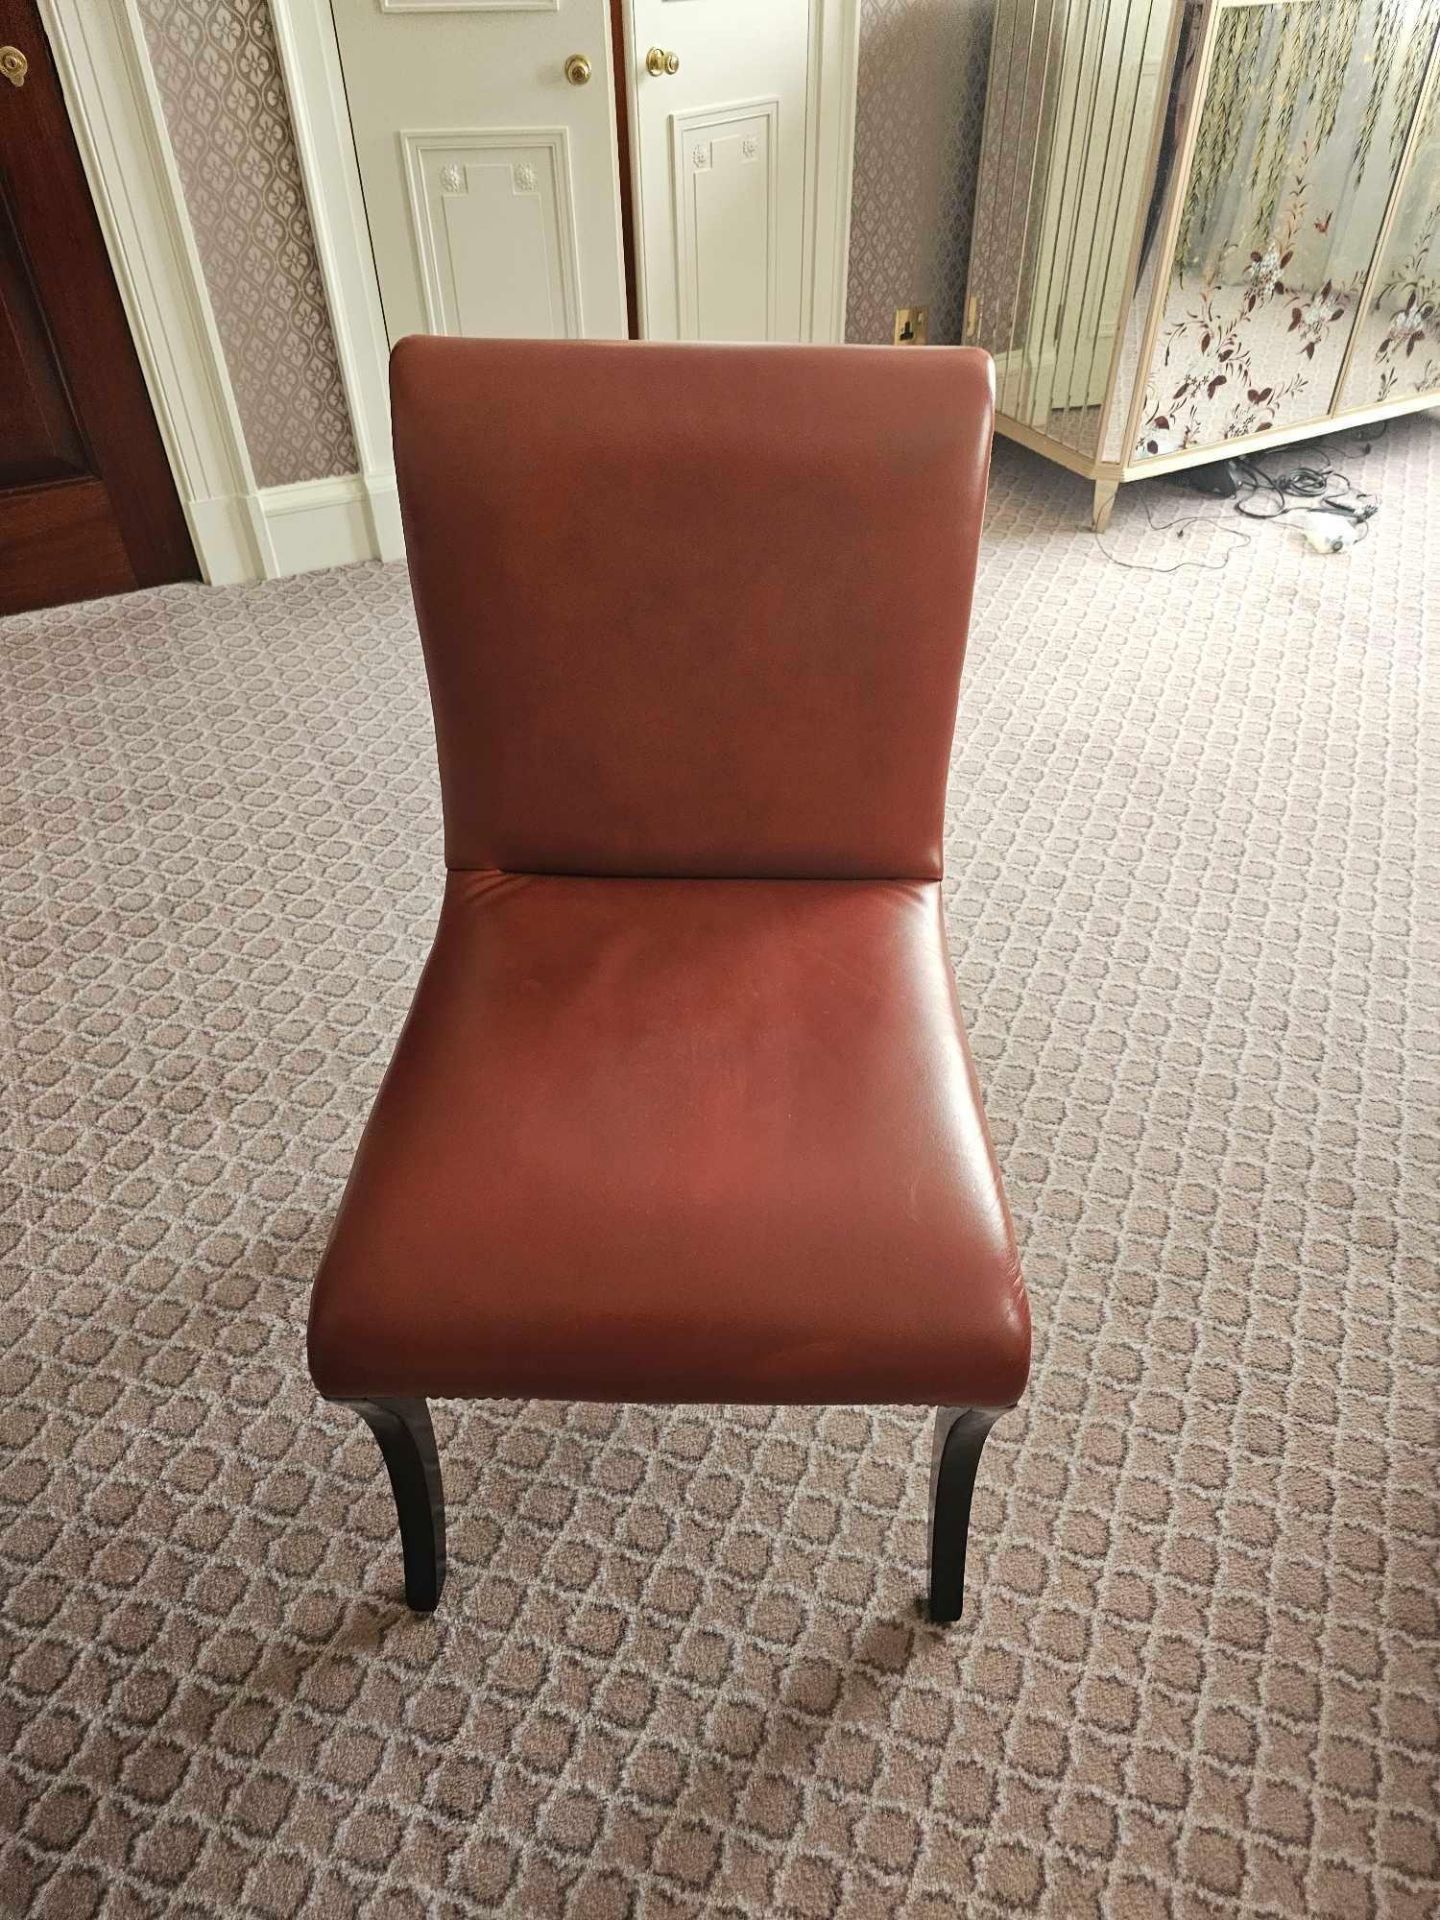 Scroll Back Leather Side Chair Legs And Frame In Solid Oak With A Stained Finish Upholstered In - Image 3 of 3